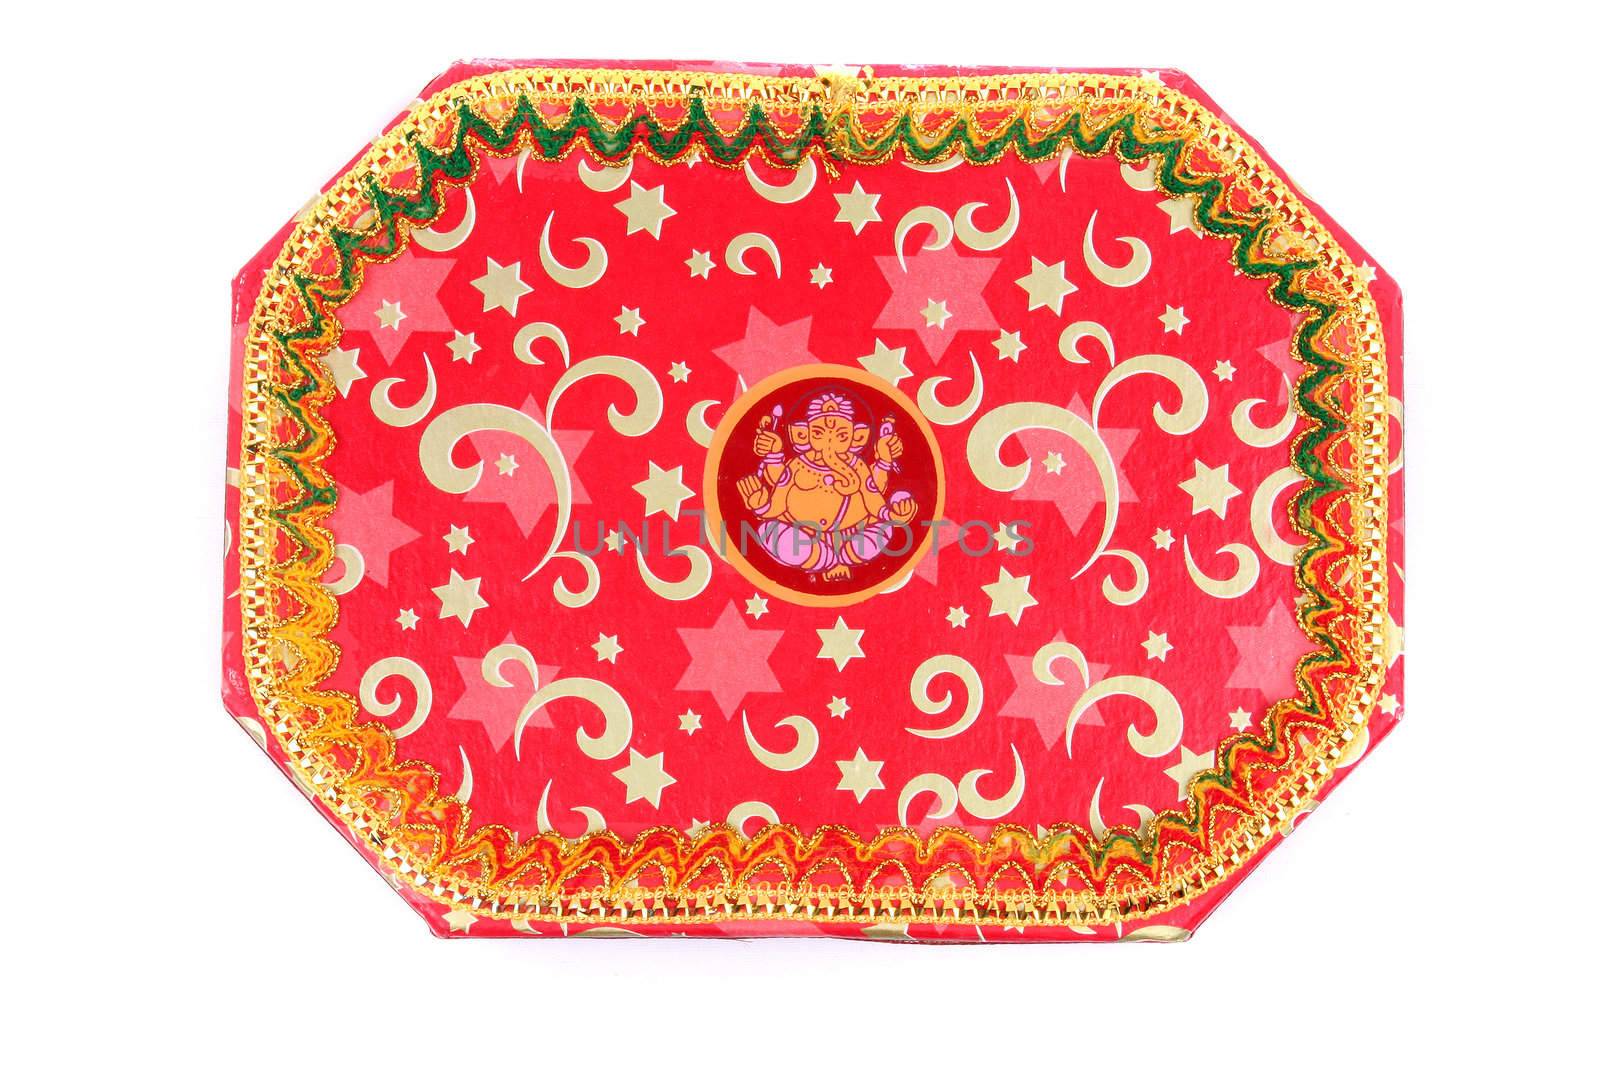 An Indian festival giftbox having a traditional design with Lord Ganesha at the center, isolated on a white background.